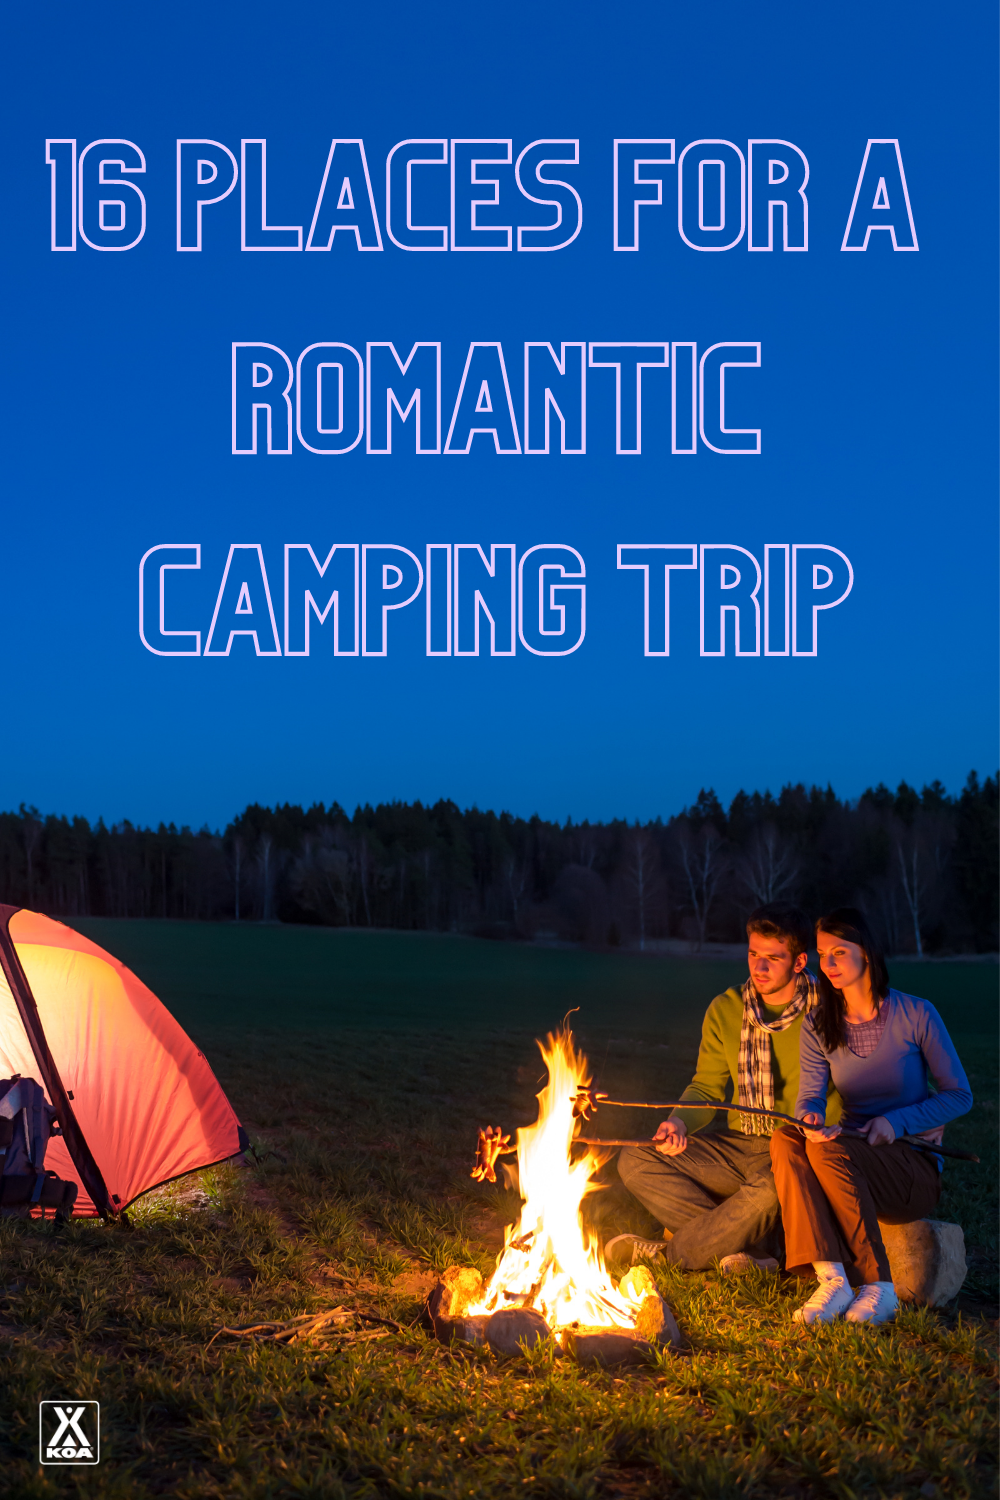 Thinking about cuddling up with your sweetheart for a romantic camping getaway? Here are out top spots for a romantic camping trip.